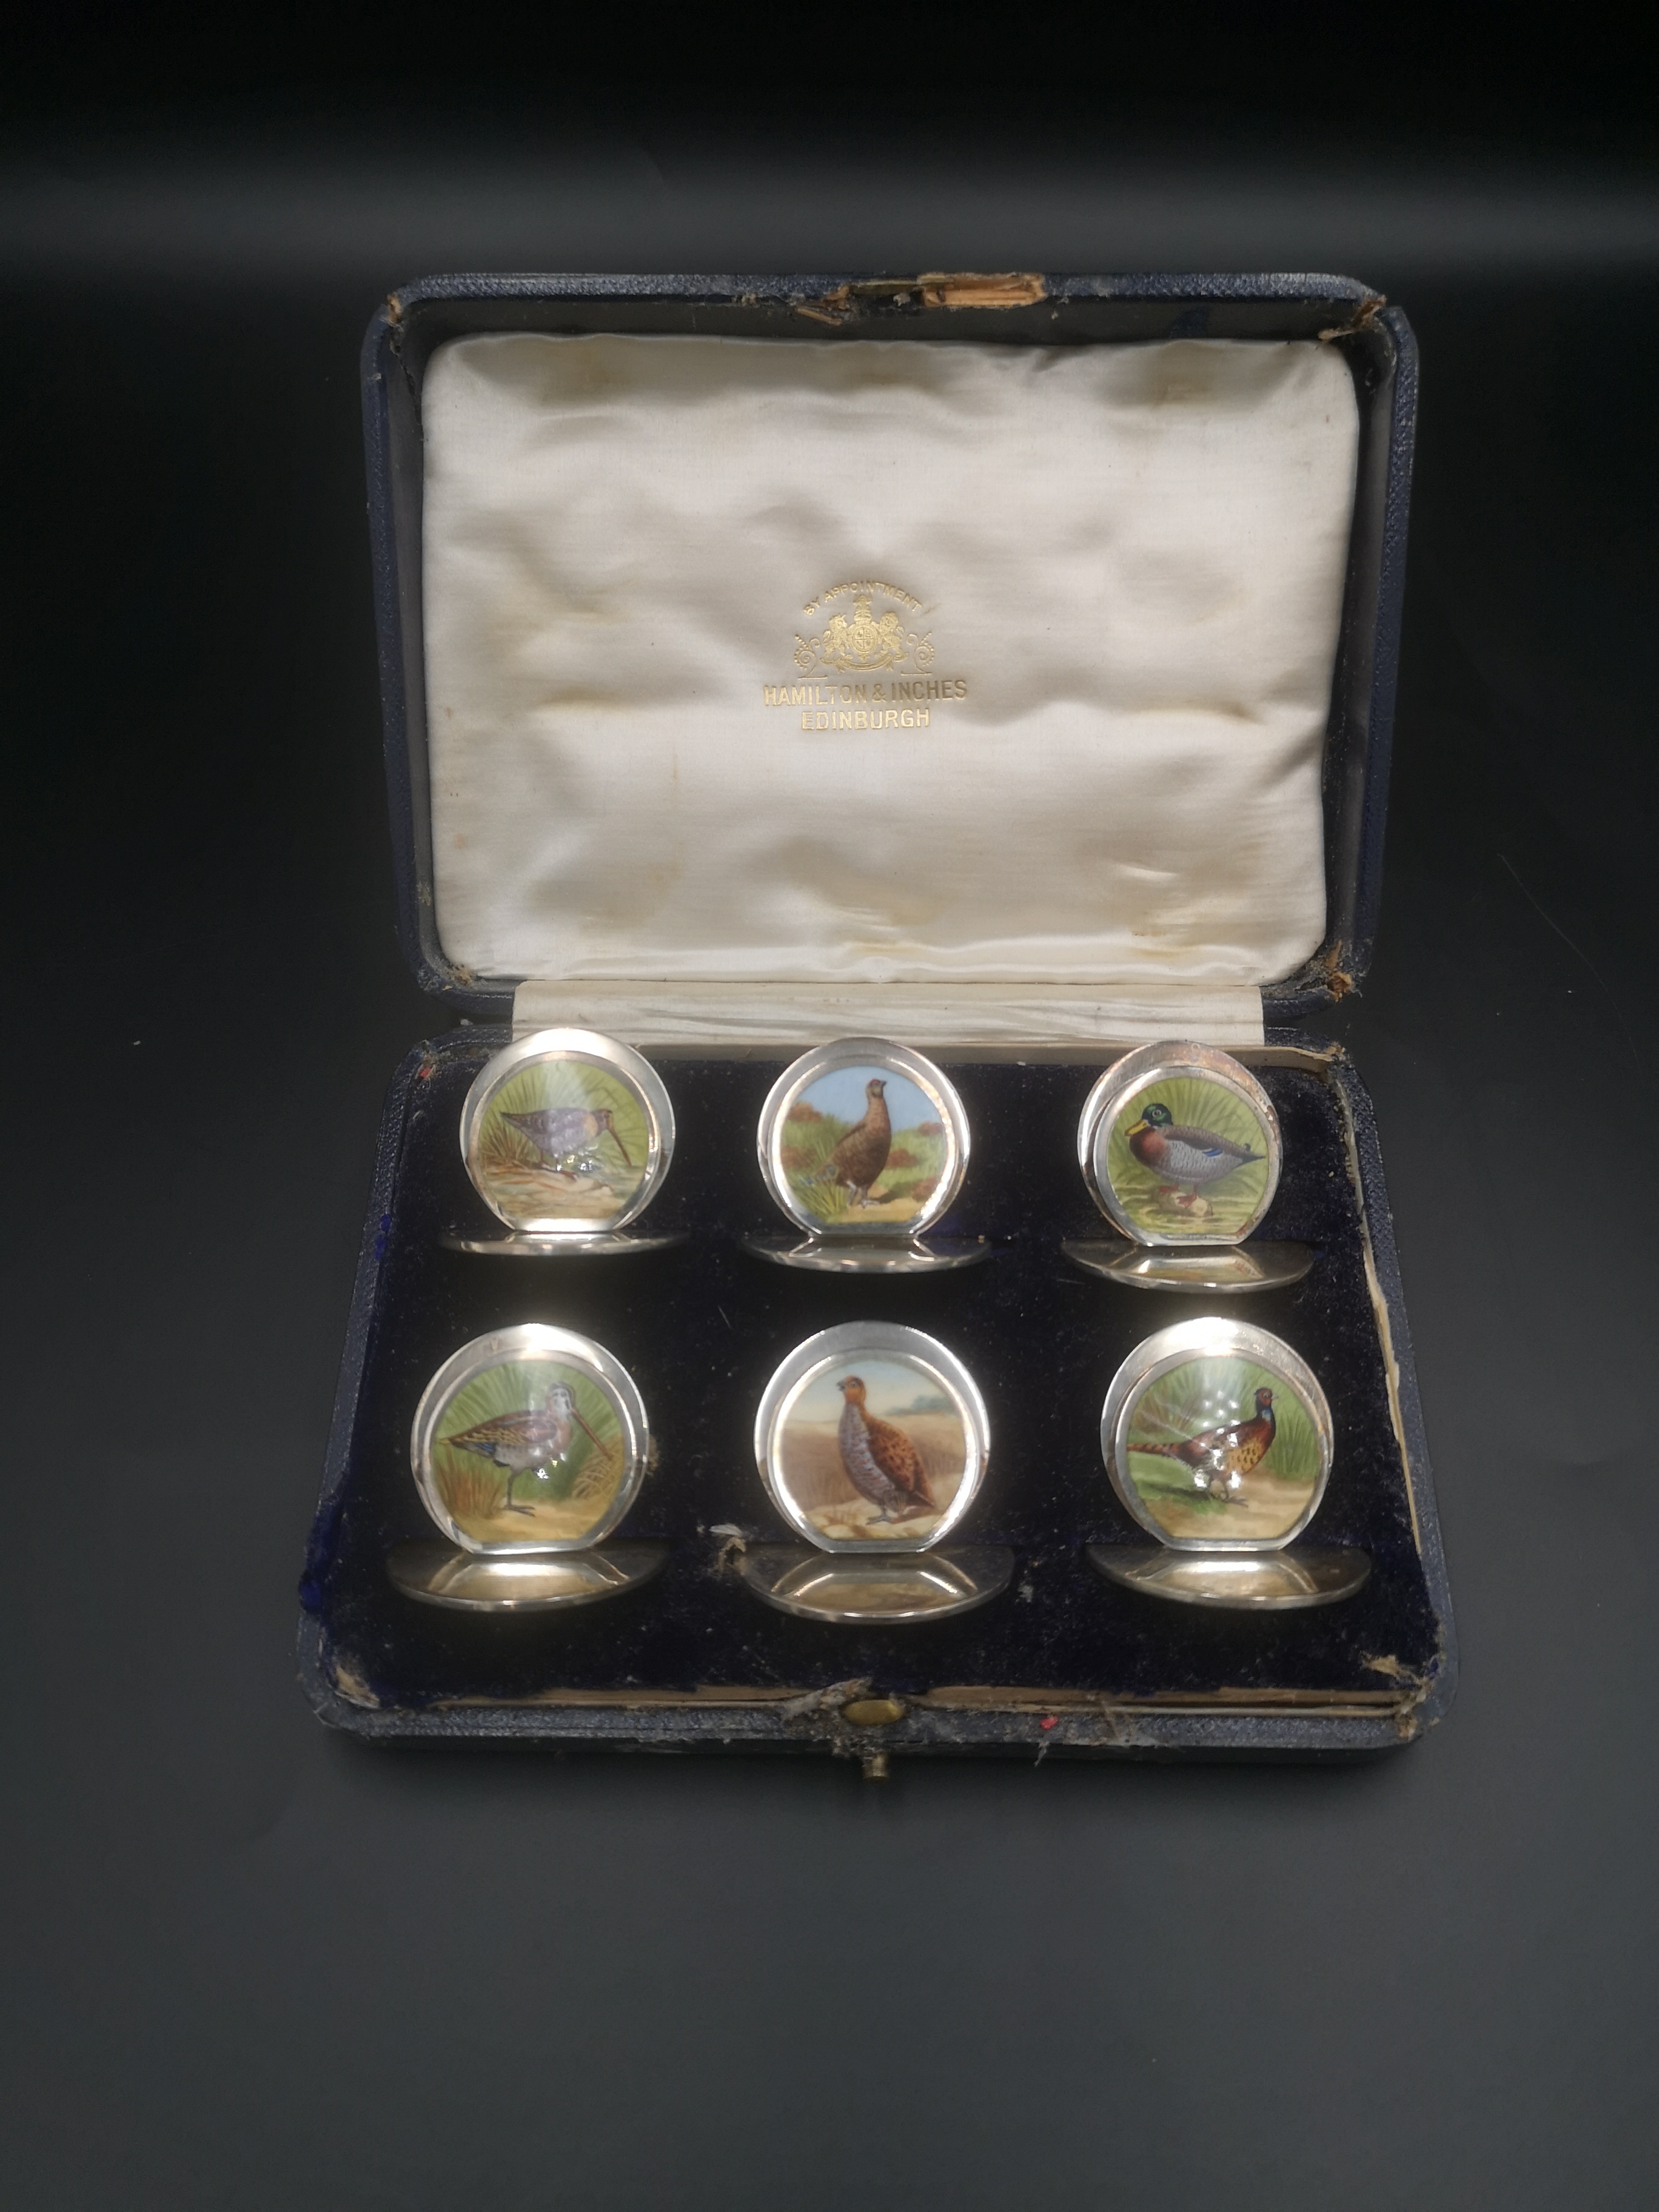 Boxed set of Edwardian silver menu card holders with hand painted birds by Sampson Mordan - Image 2 of 5